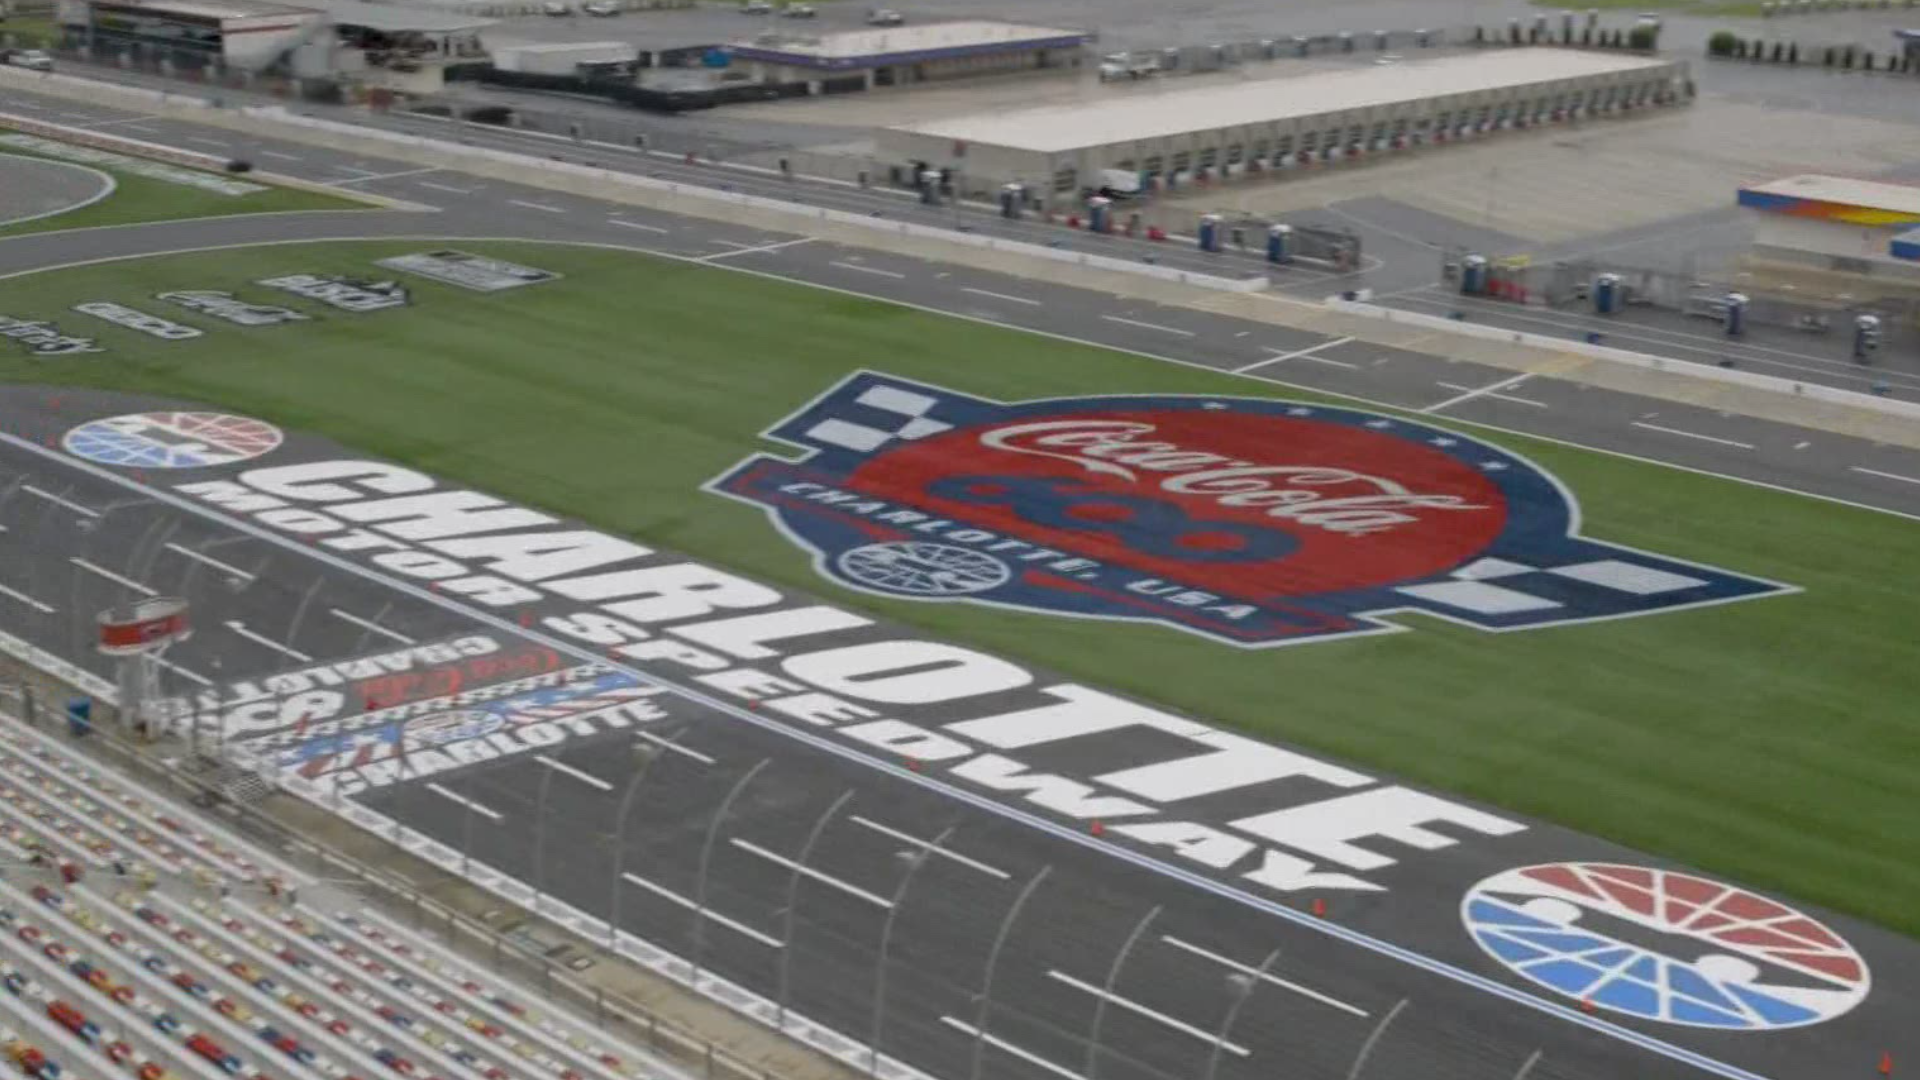 NASCAR Coca-Cola 600 at Charlotte Motor Speedway today wcnc